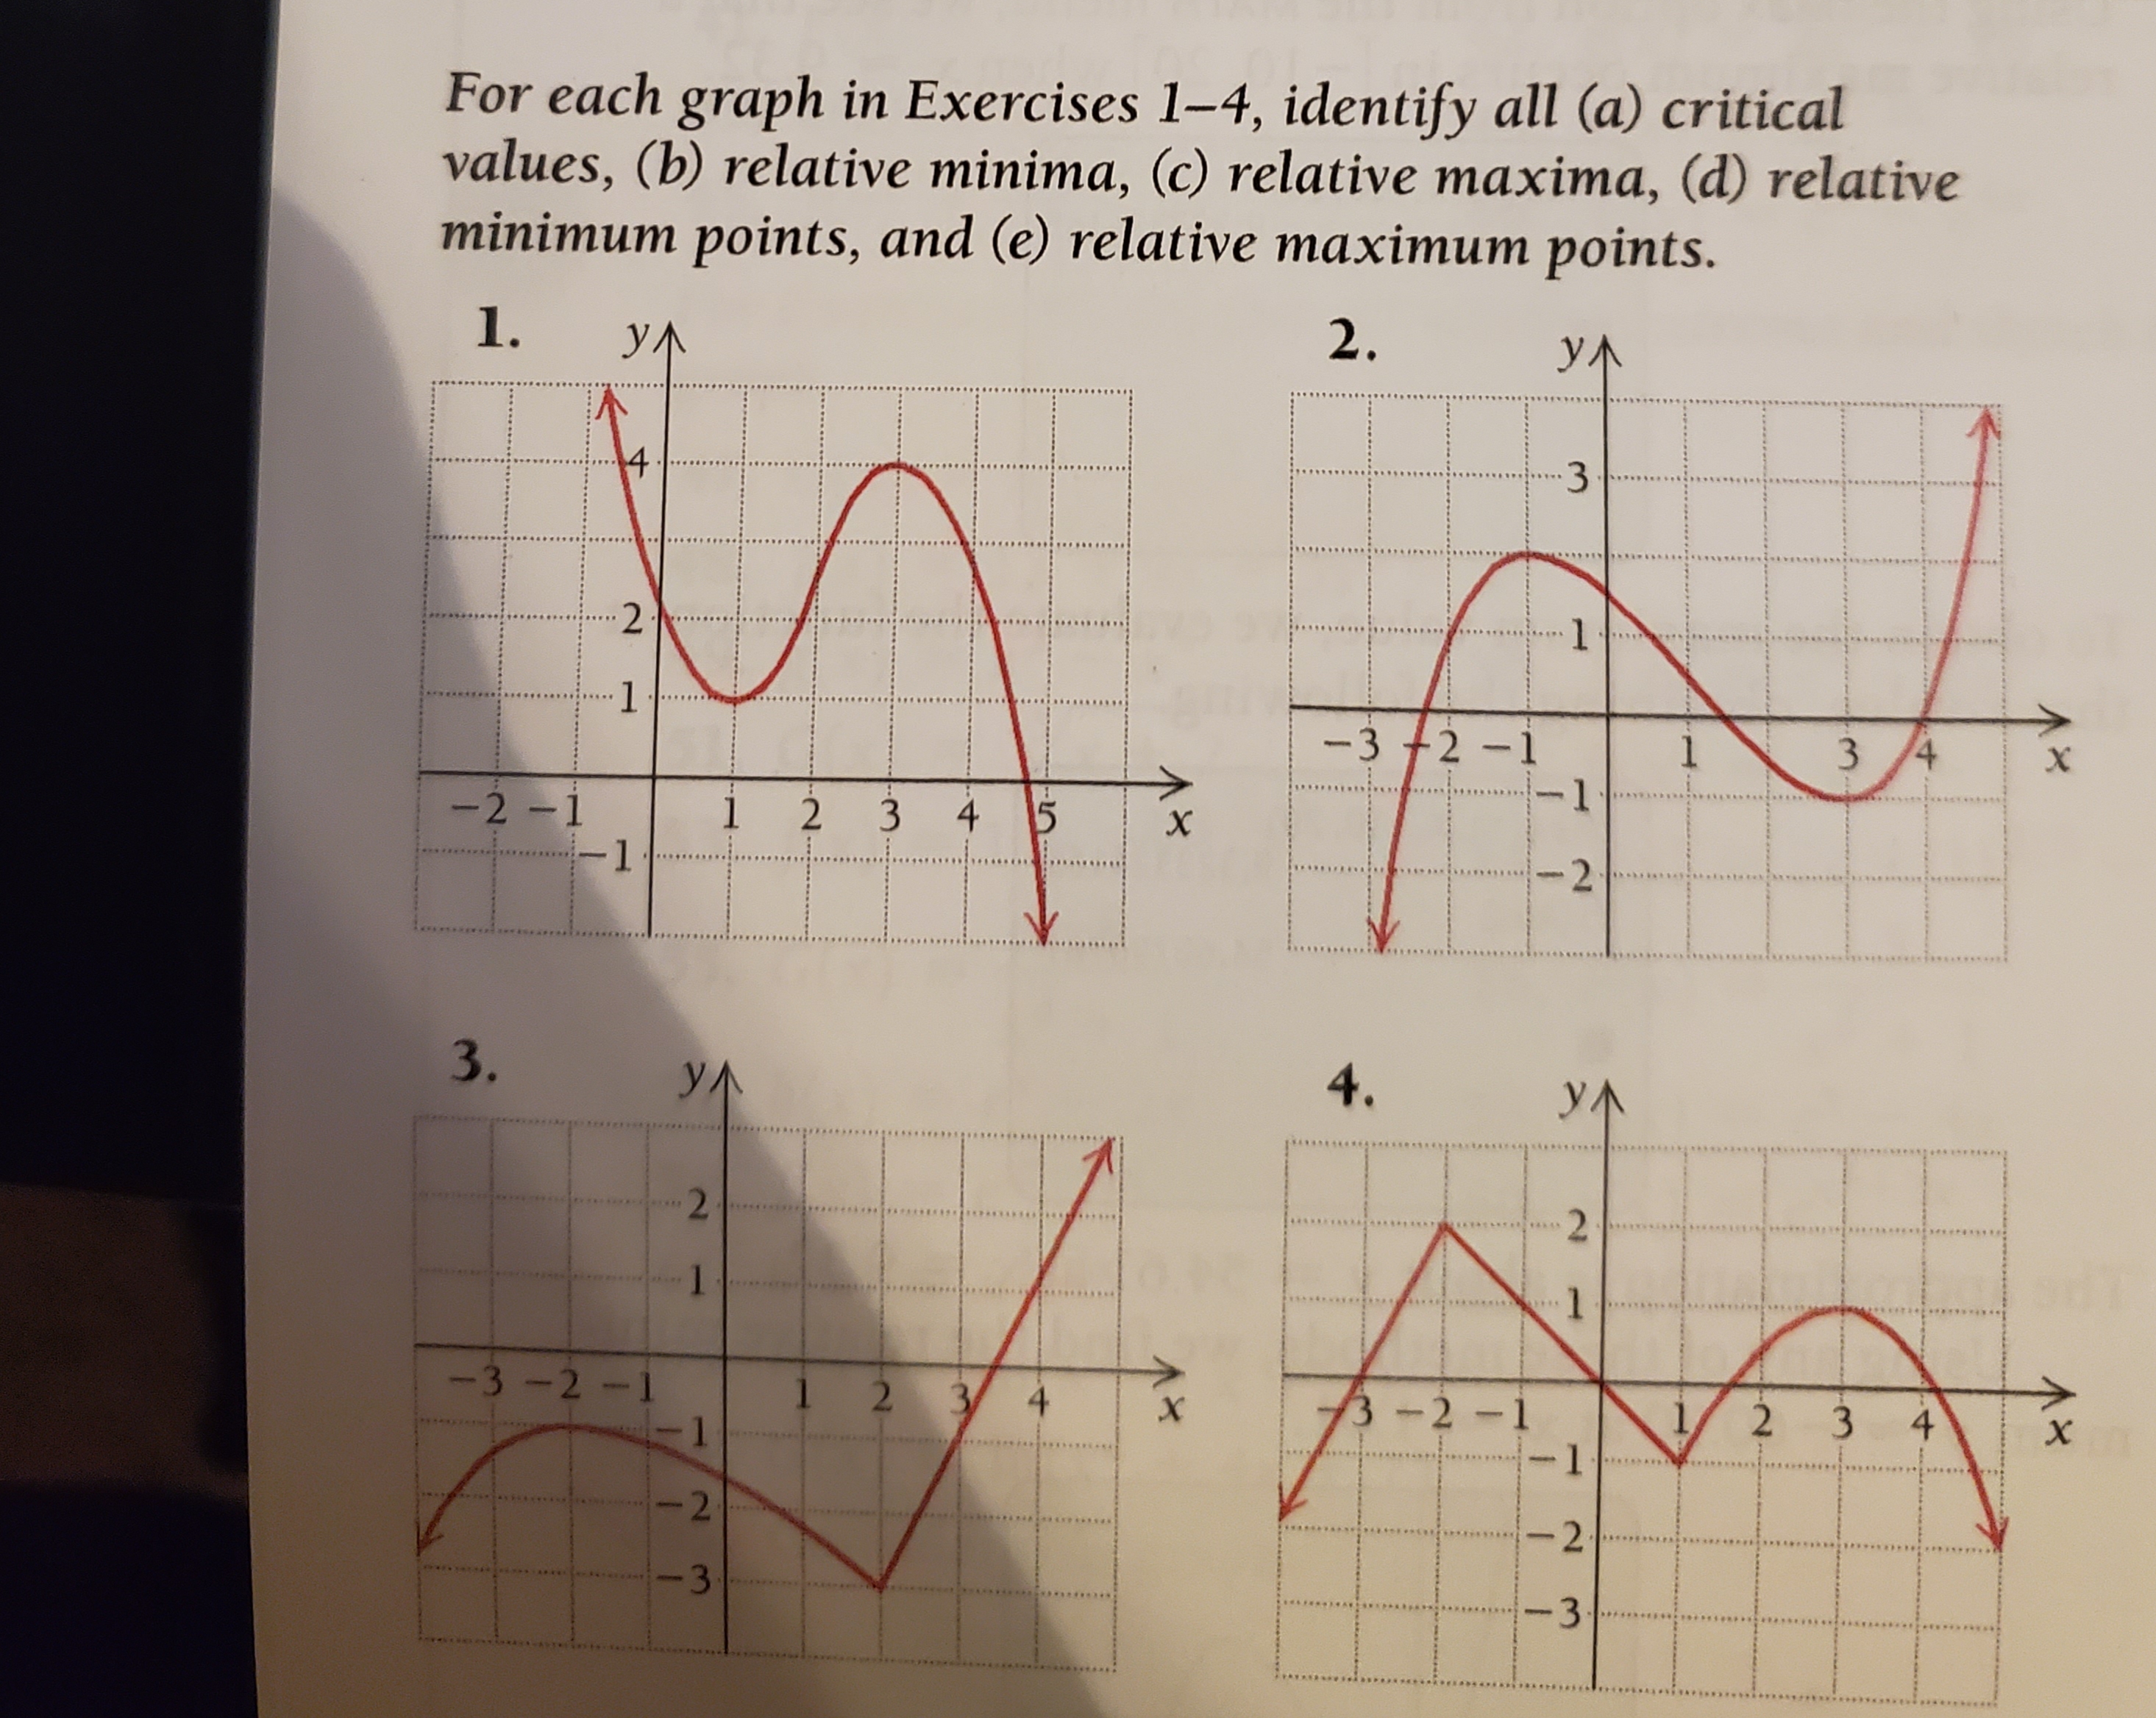 For each graph in Exercises 1-4, identify all (a) critical
values, (b) relative minima, (c) relative maxima, (d) relative
minimum points, and (e) relative maximum points.
1.
2.
УЛ
УЛ
4
3
1
1.
-3 +2 -1
1
3
-2 -1
2
3
4
2
3.
УЛ
4.
УЛ
2
2
1
1
-3 -2 -1
1
2
3
4
3 -2-1
X
2 3
4
1
2
2
3
-3
